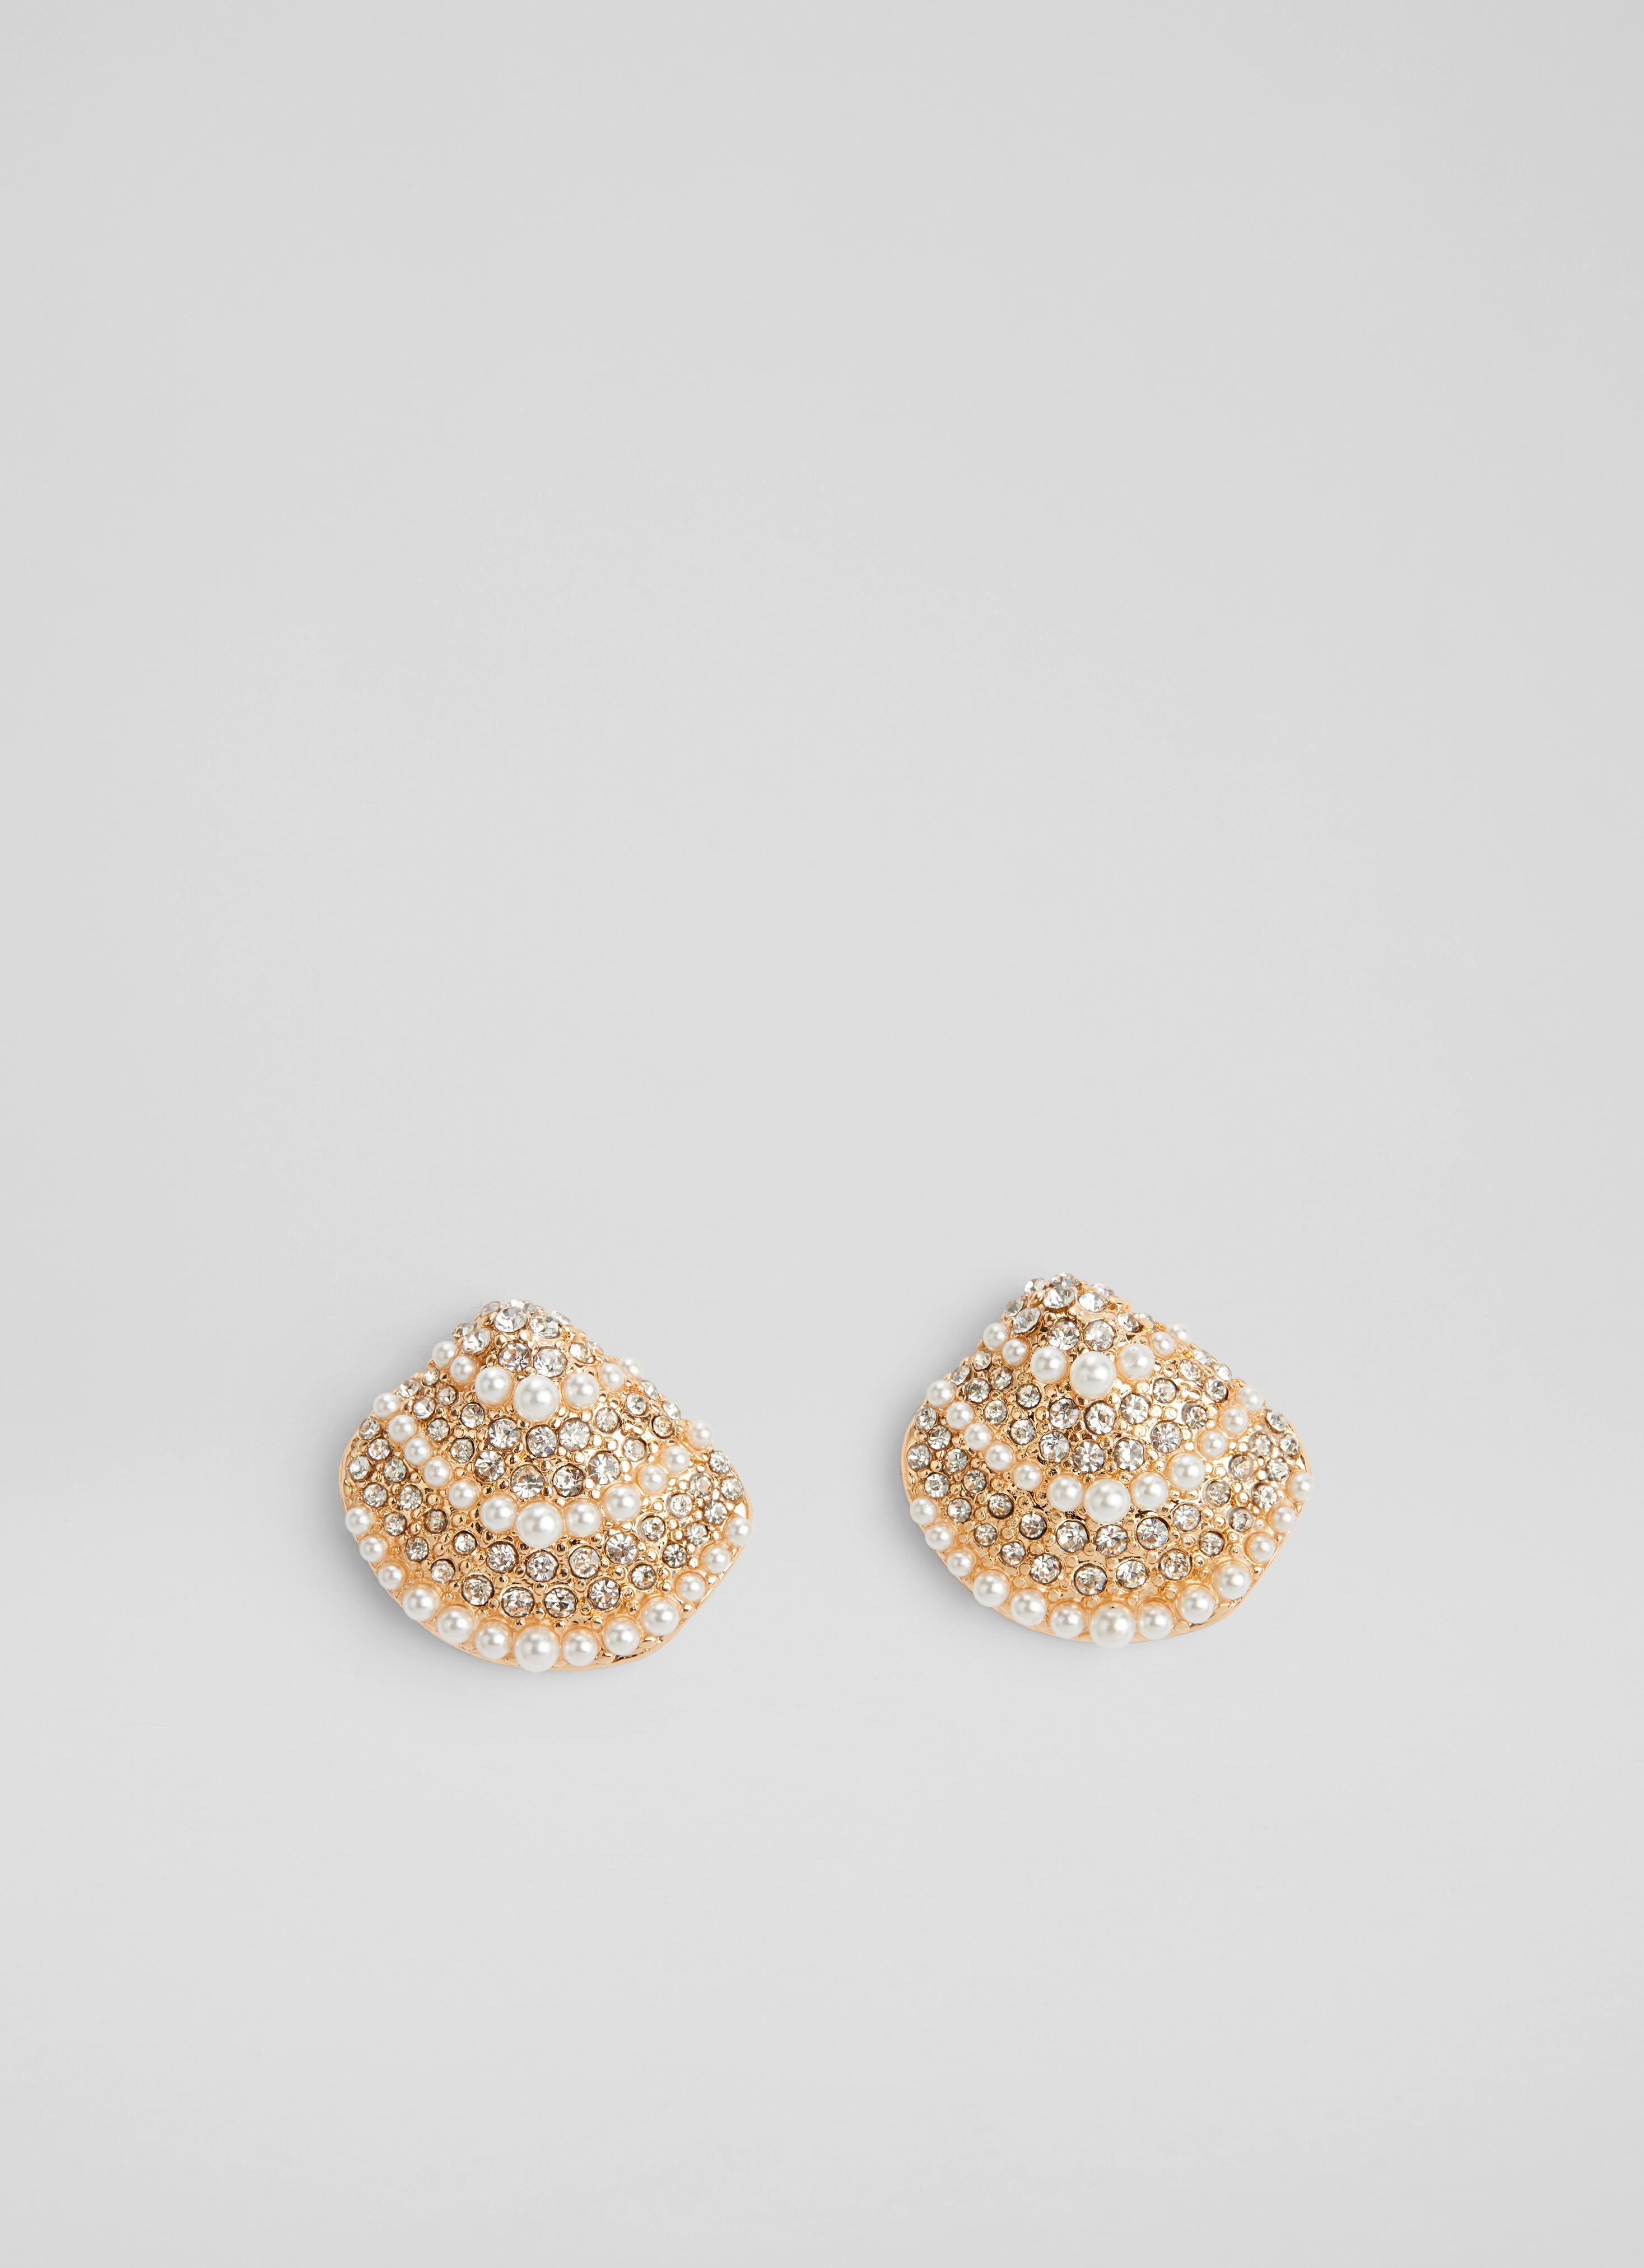 L.K.Bennett Kaia Pearl and Crystal Gold Plated Shell Earrings, Cream Gold